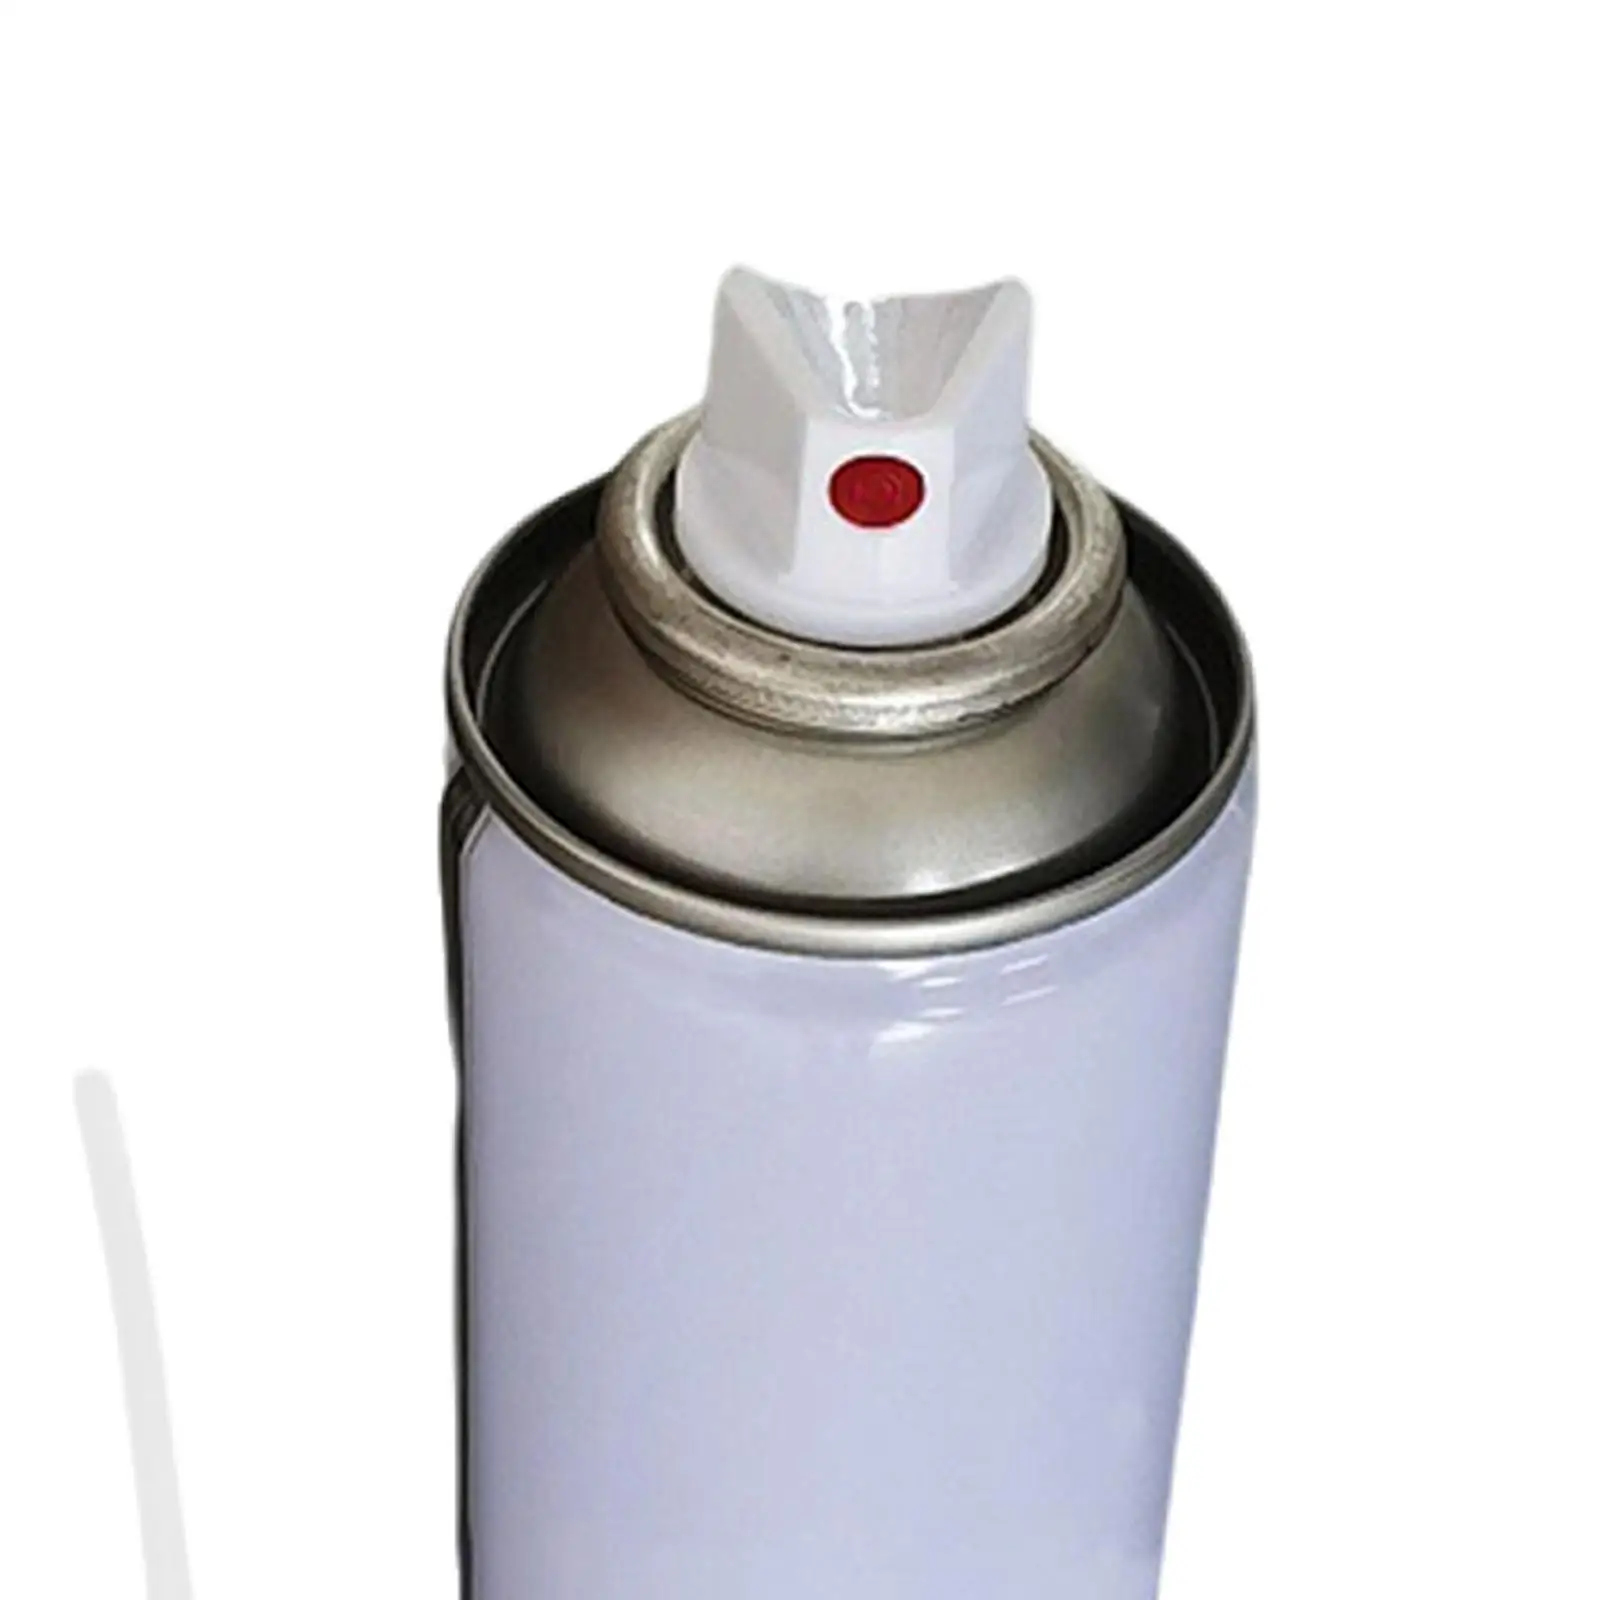 Aerosol Canister Metal Lightweight Refillable Leakproof Liquid Portable Industrial Empty Storage 300 ml Spray Can Air Powered